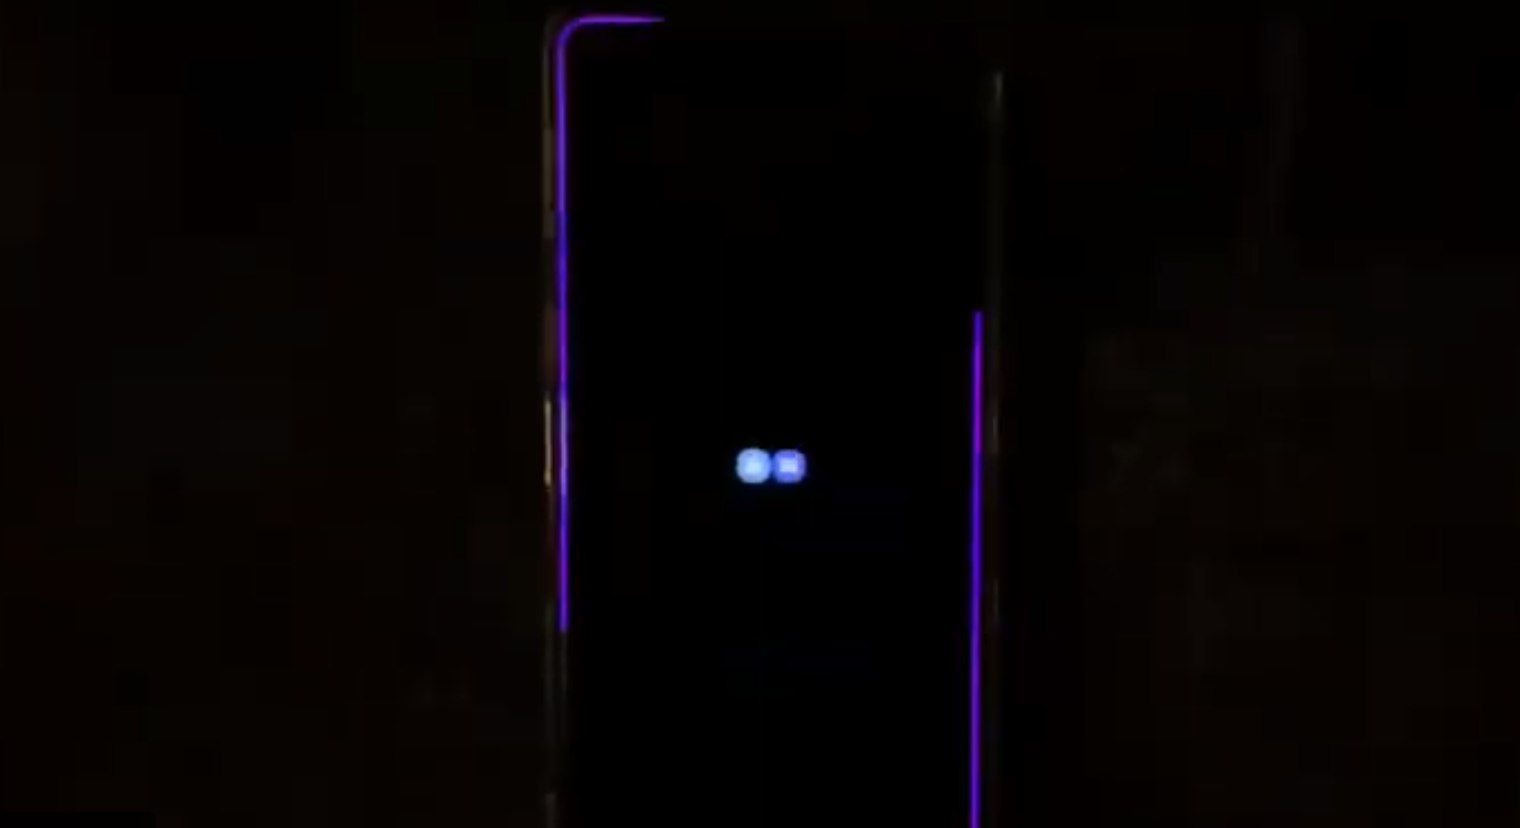 [EXCLUSIVE] Samsung Galaxy S10/One UI Edge Lighting Fix app brings new features, developer shares insights